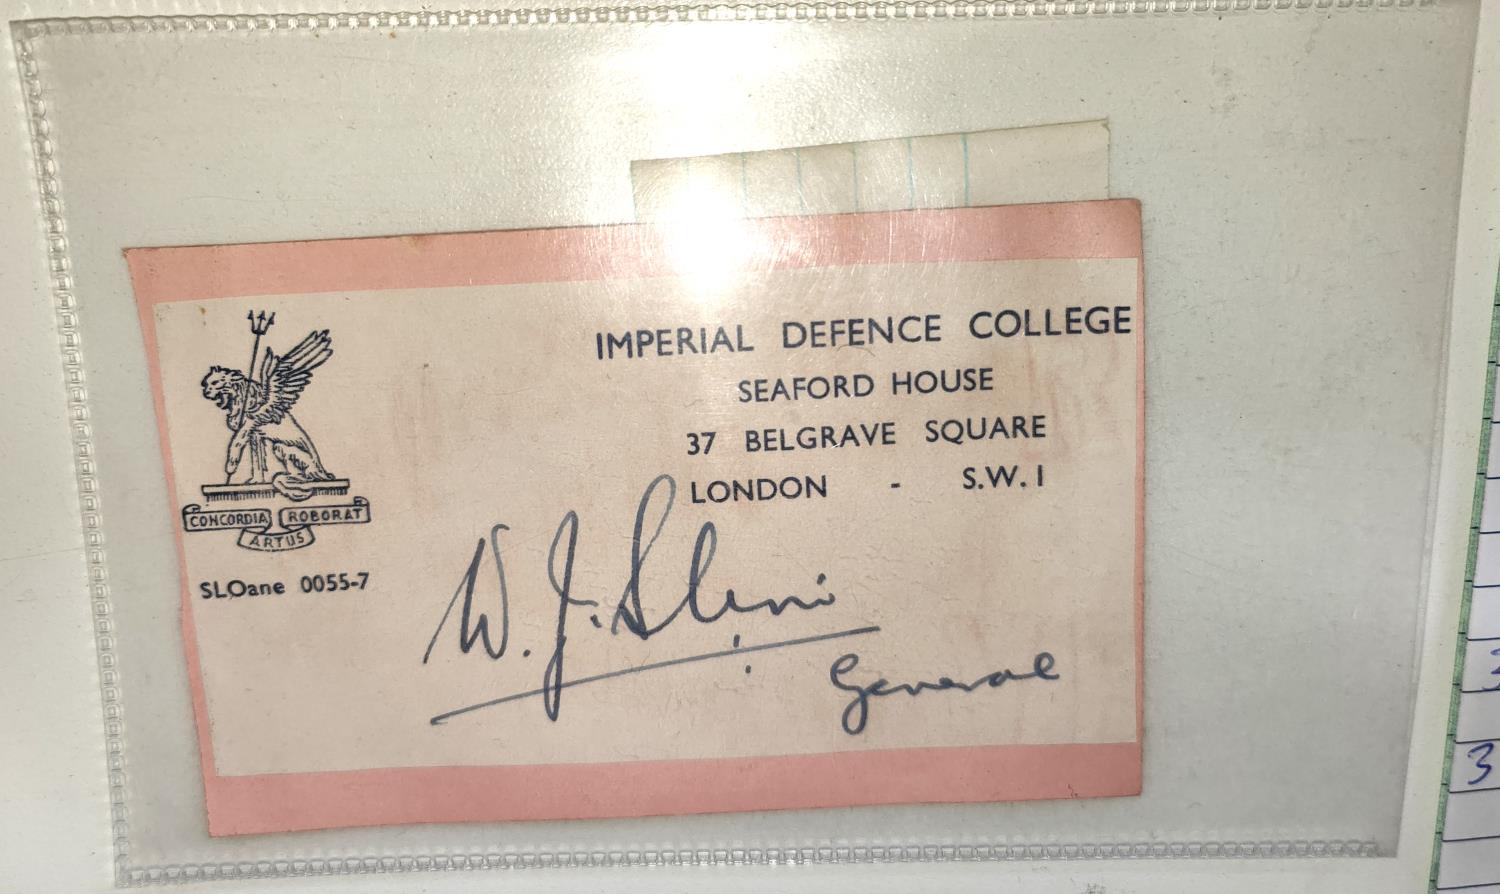 A mounted pen signature from General W. J. Slim on Imperial Defence College paper